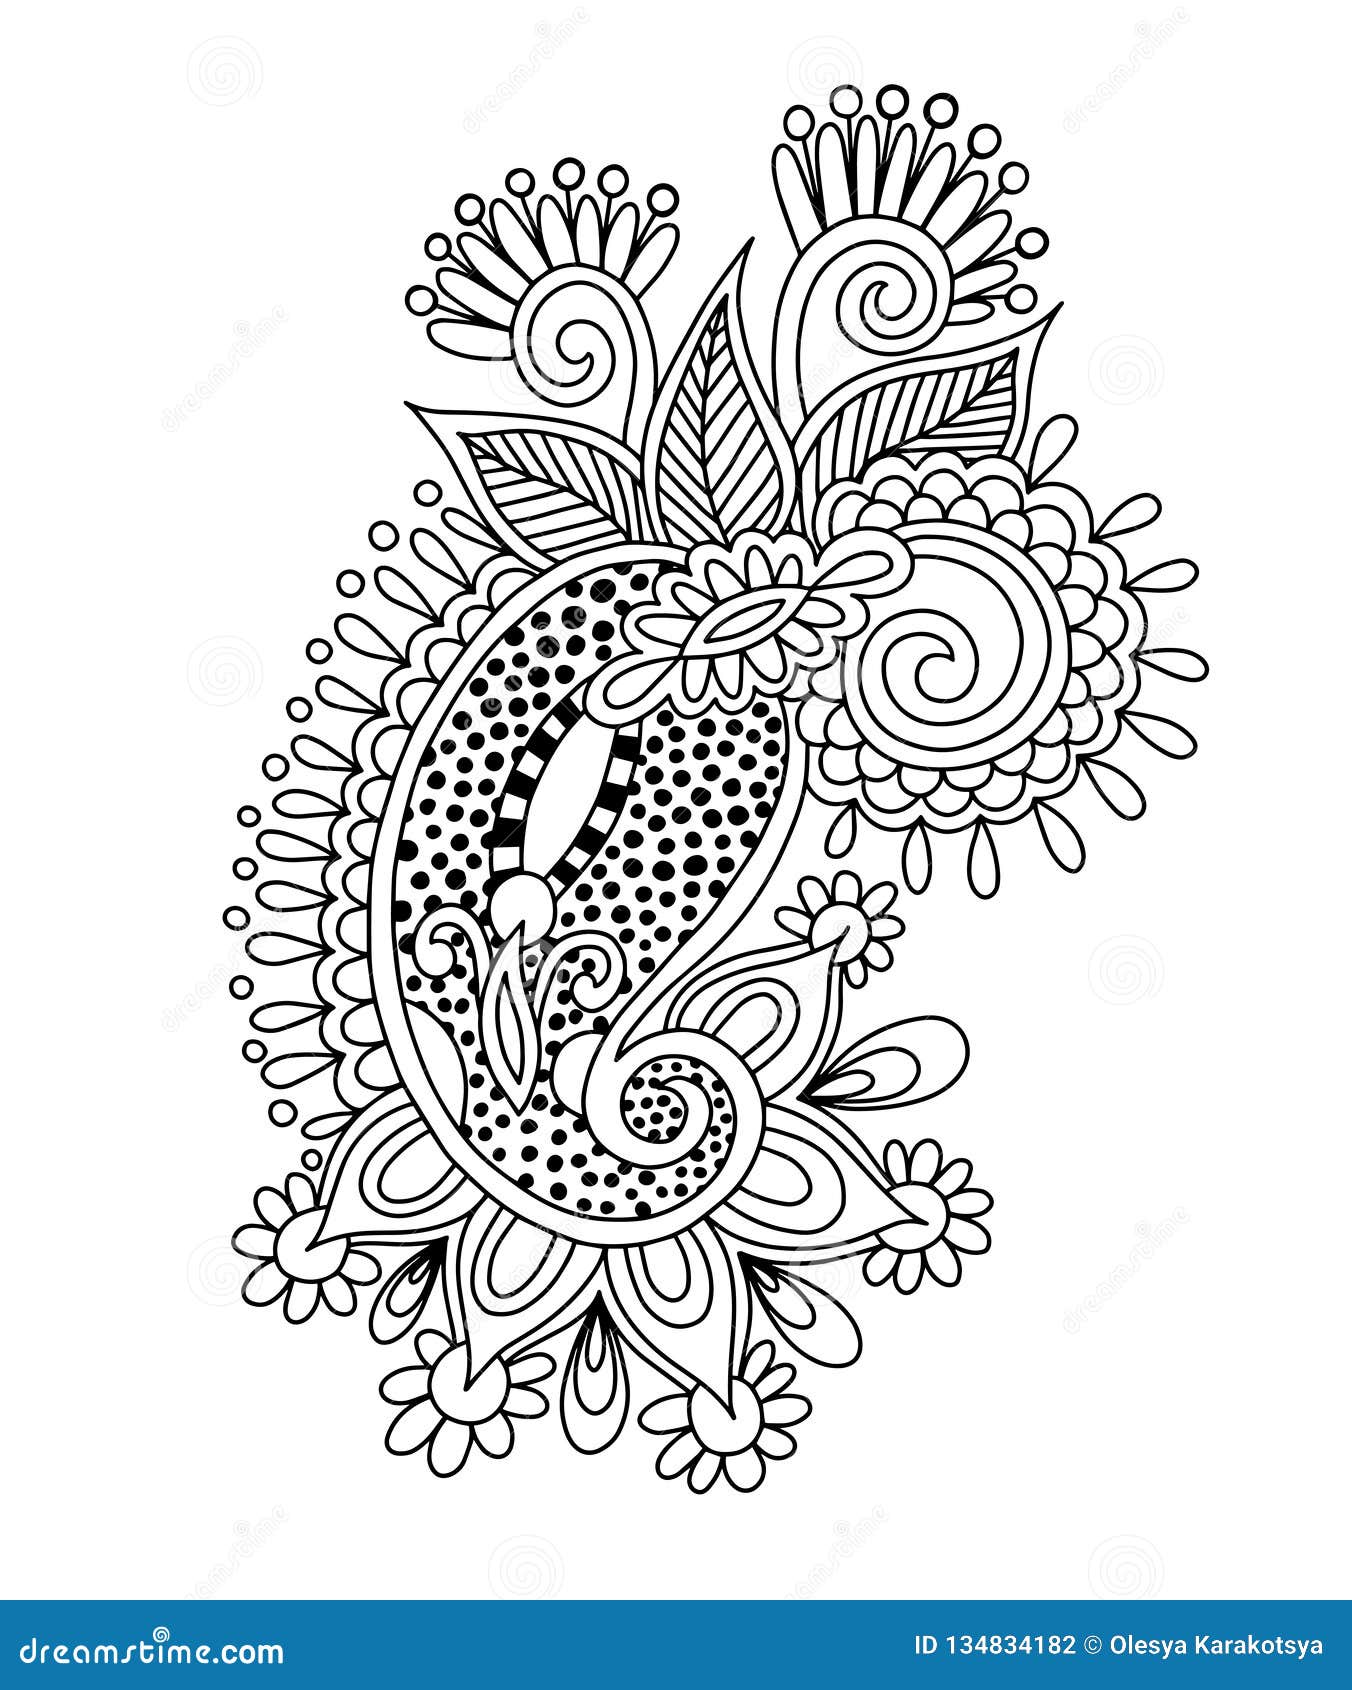 How To Draw Mehndi Designs - Apps on Google Play